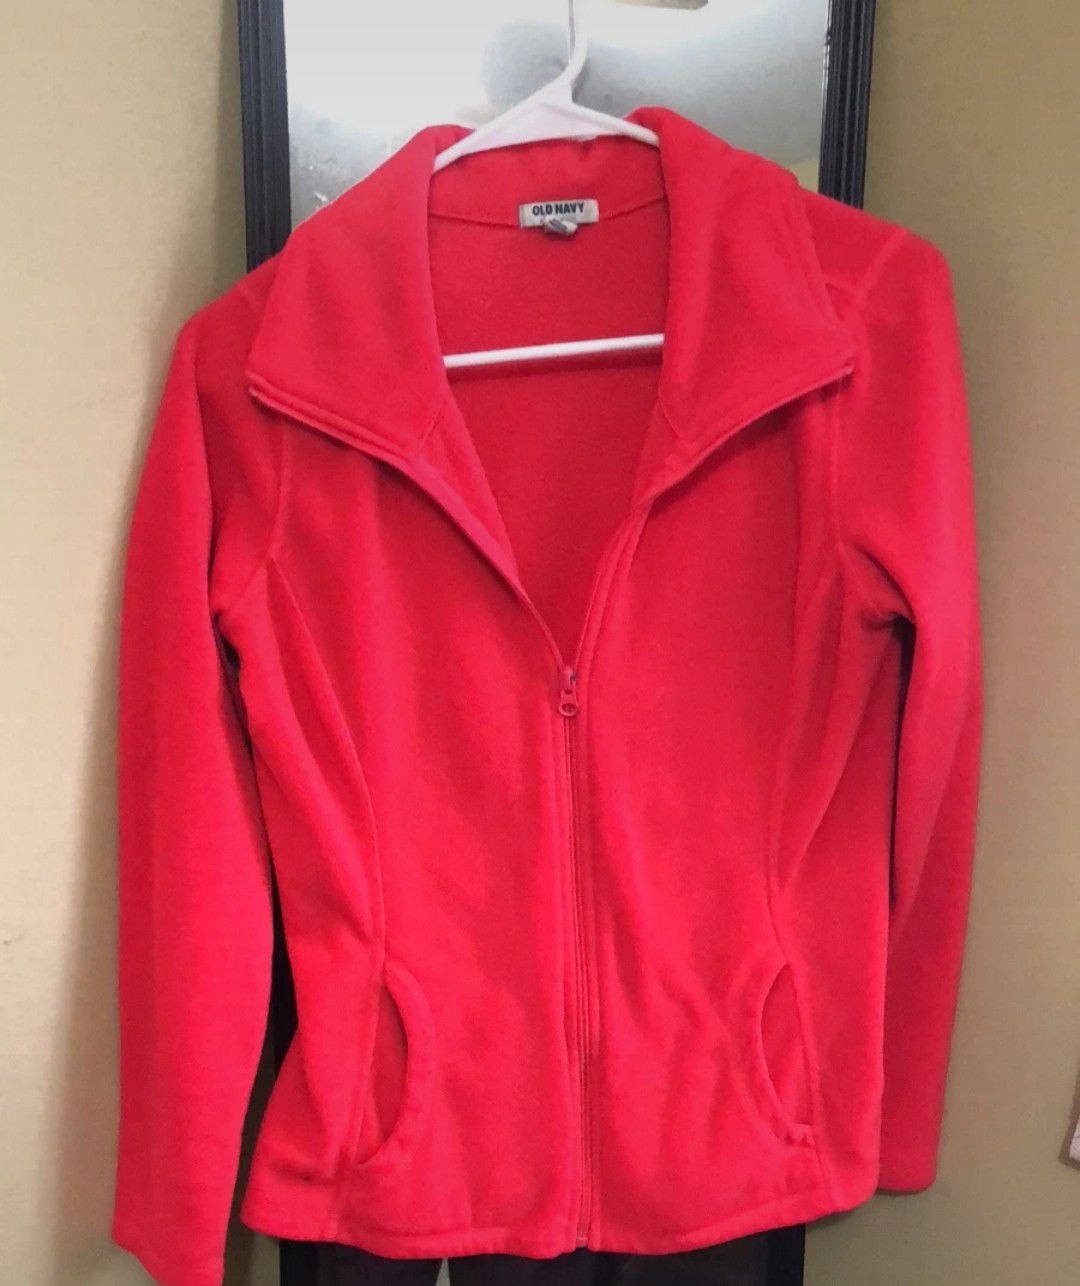 Old Navy Hot Pink Fleece Jacket Size Small